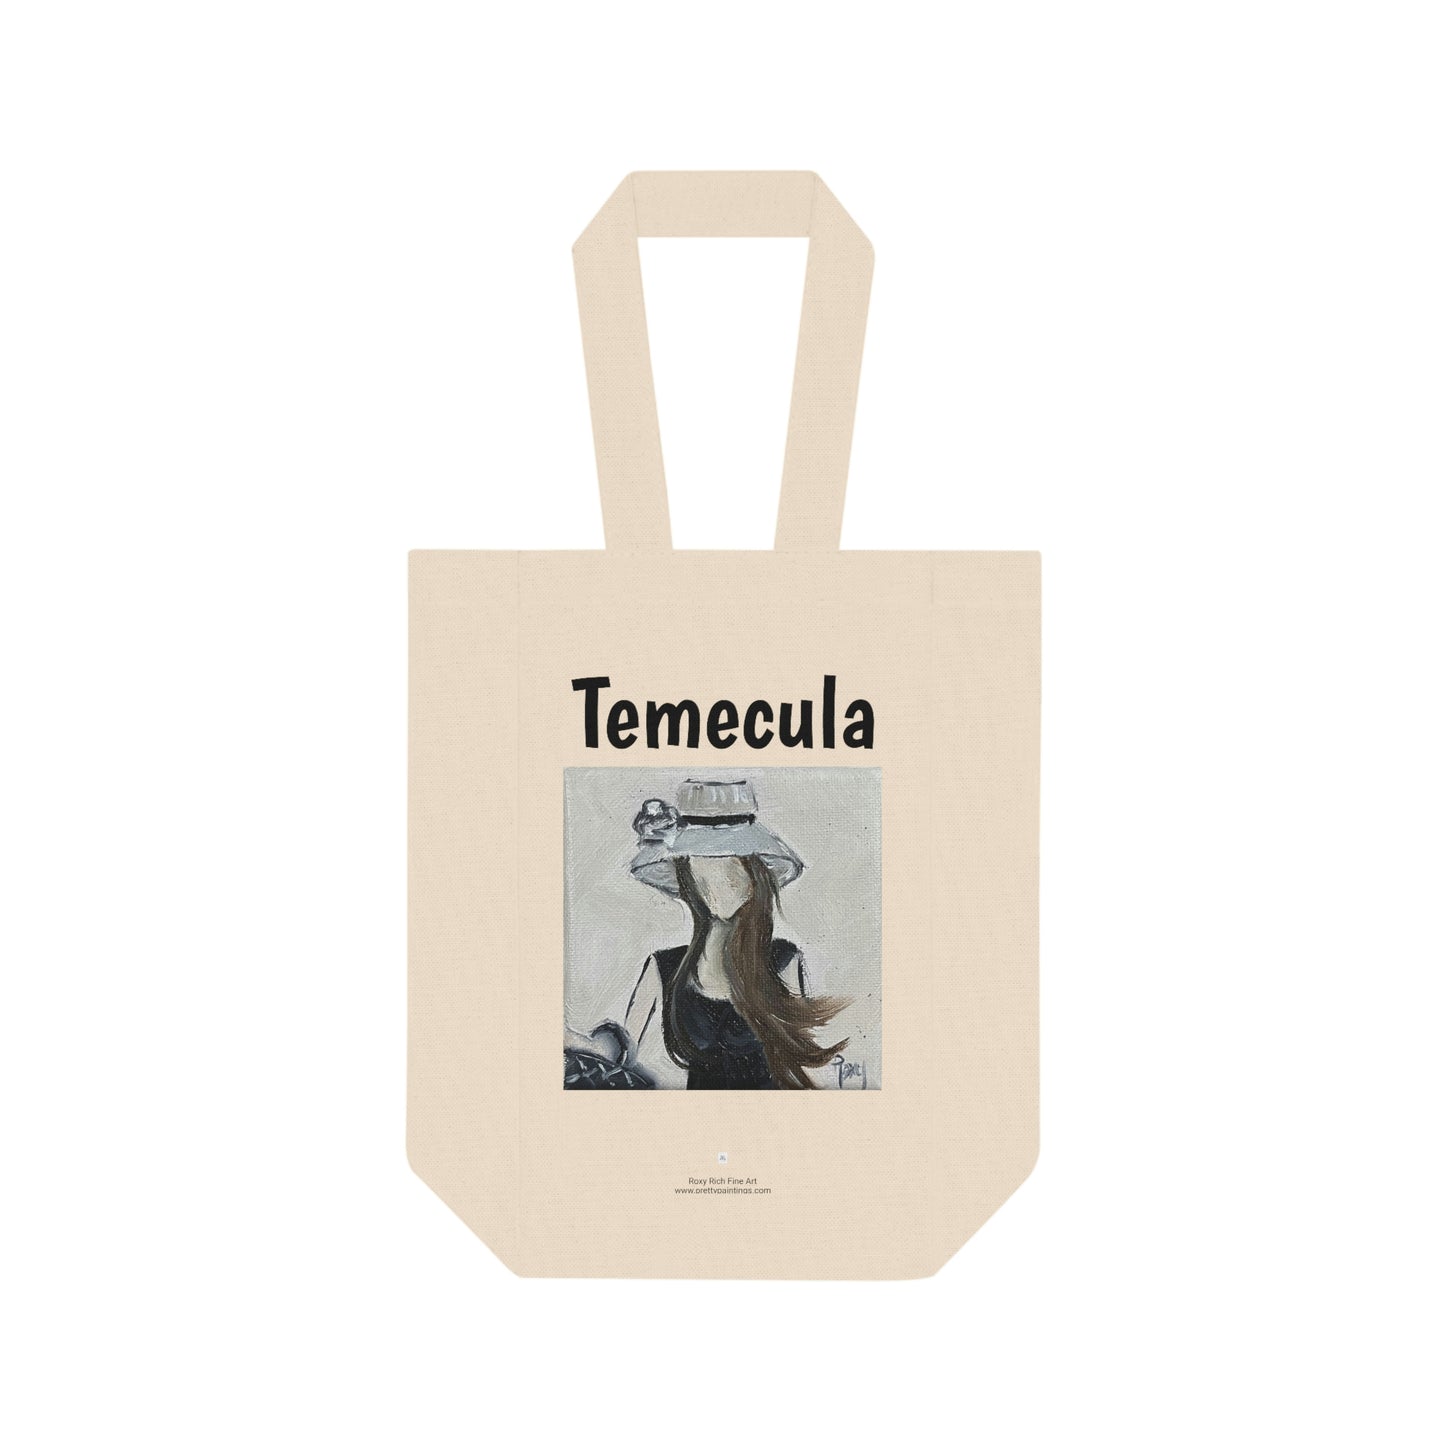 Temecula Double Wine Tote Bag featuring "Summer Glam" painting